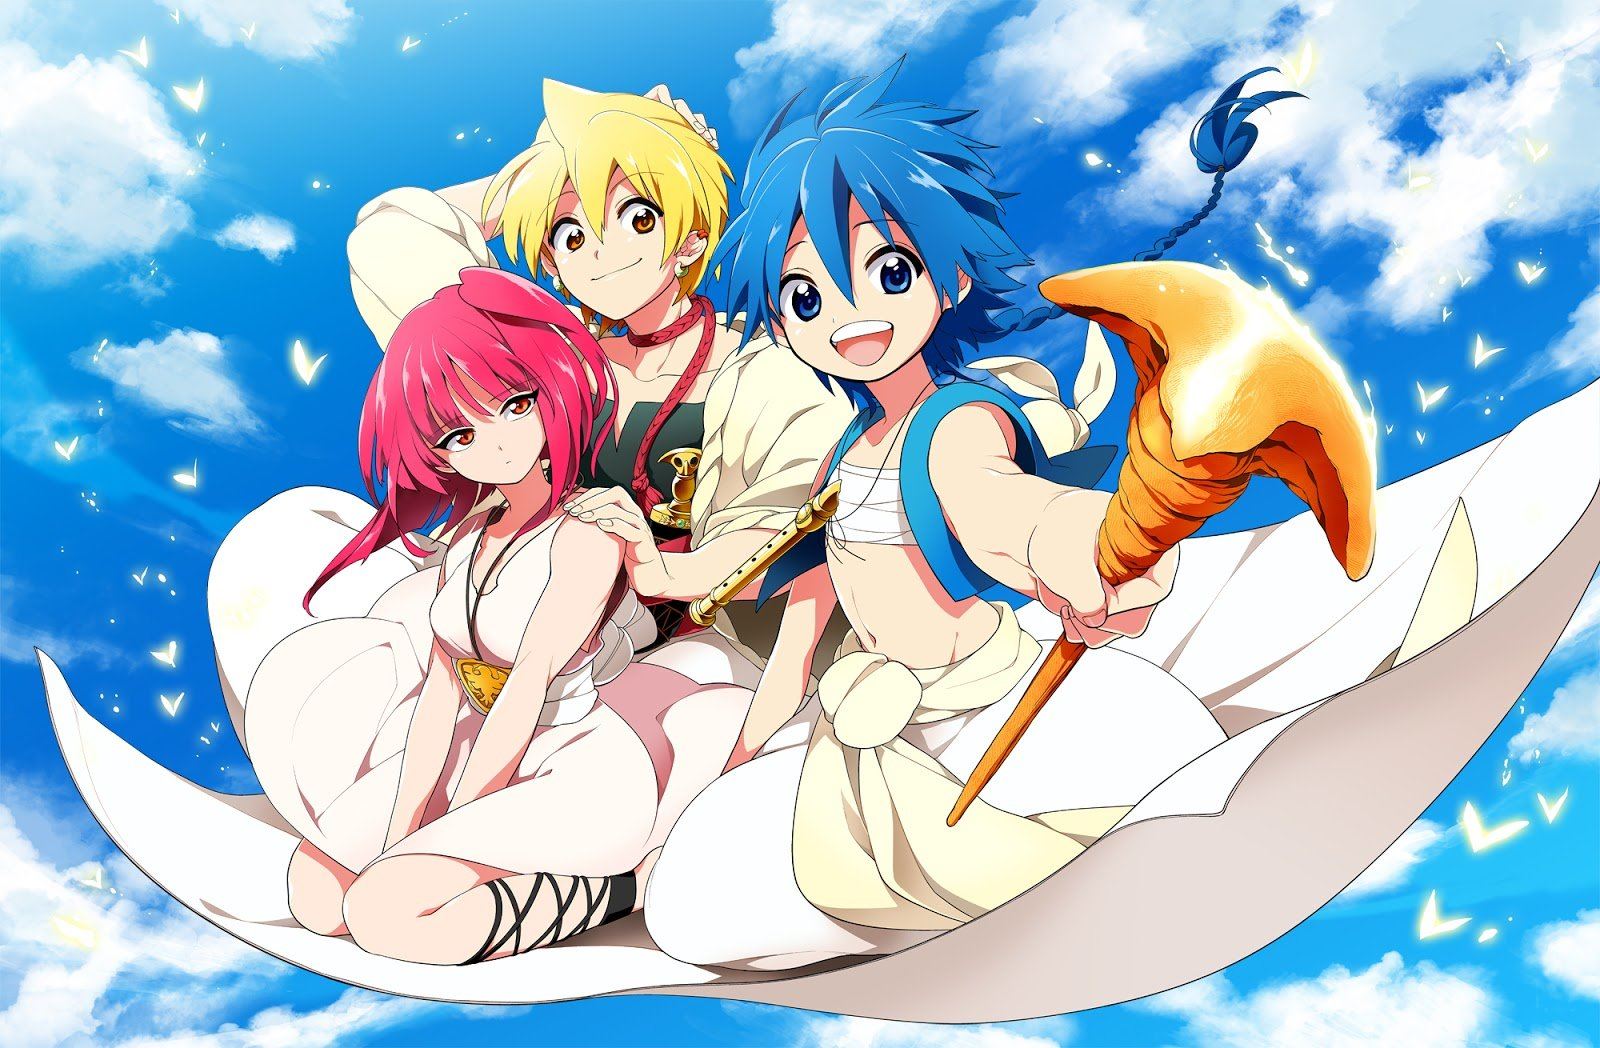 The Manga Magi will end in 4 chapters - Nakama Store.